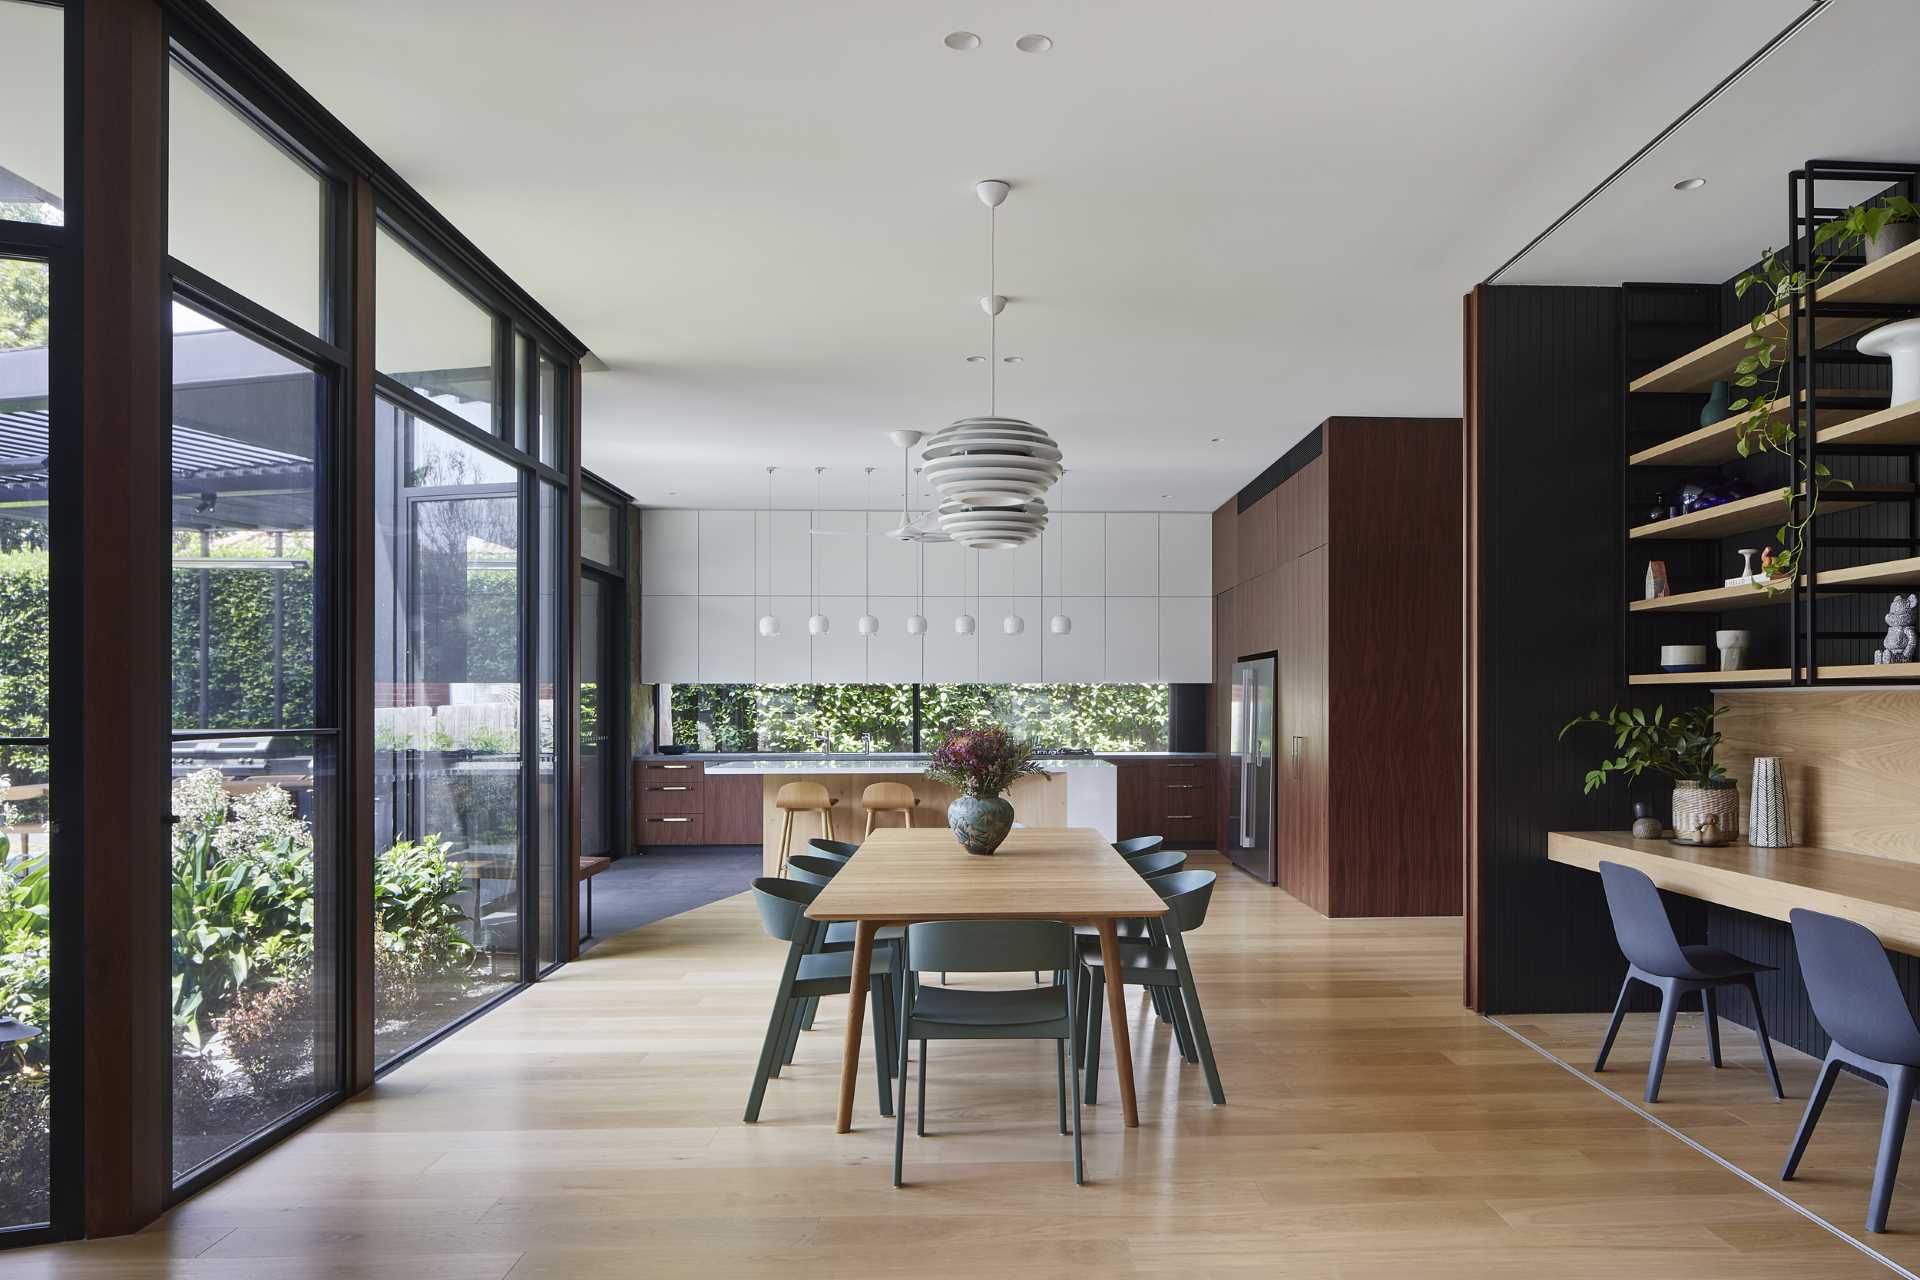 This modern dining room separates the living room from the kitchen, with two pendant lights defining the location of the dining table and chairs.